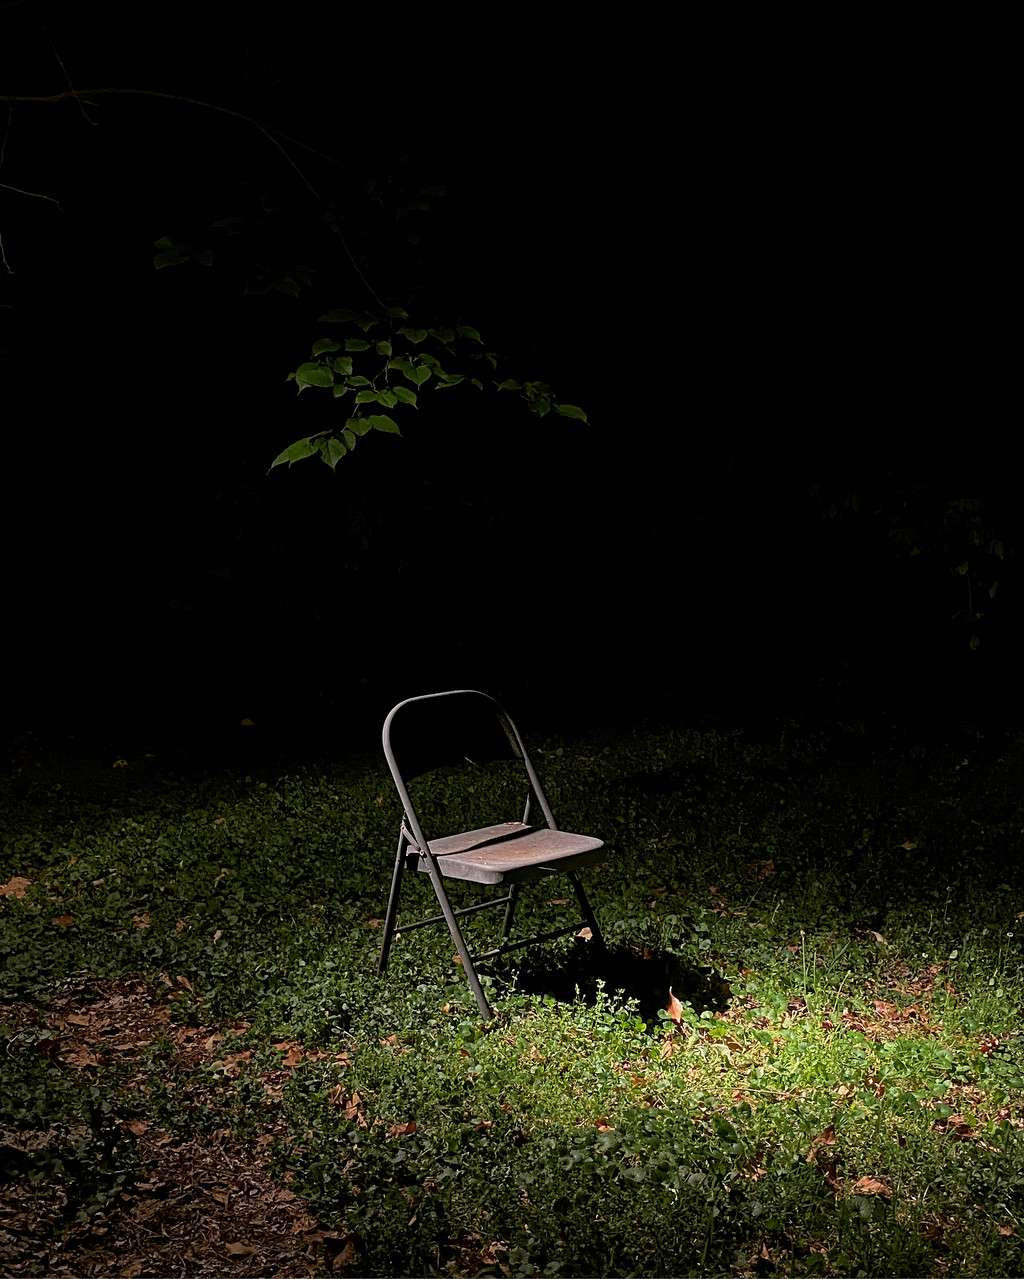 Archival inkjet prints on Canson Platine Fibre Rag by Lindsay Metivier, folding chair on grass at night